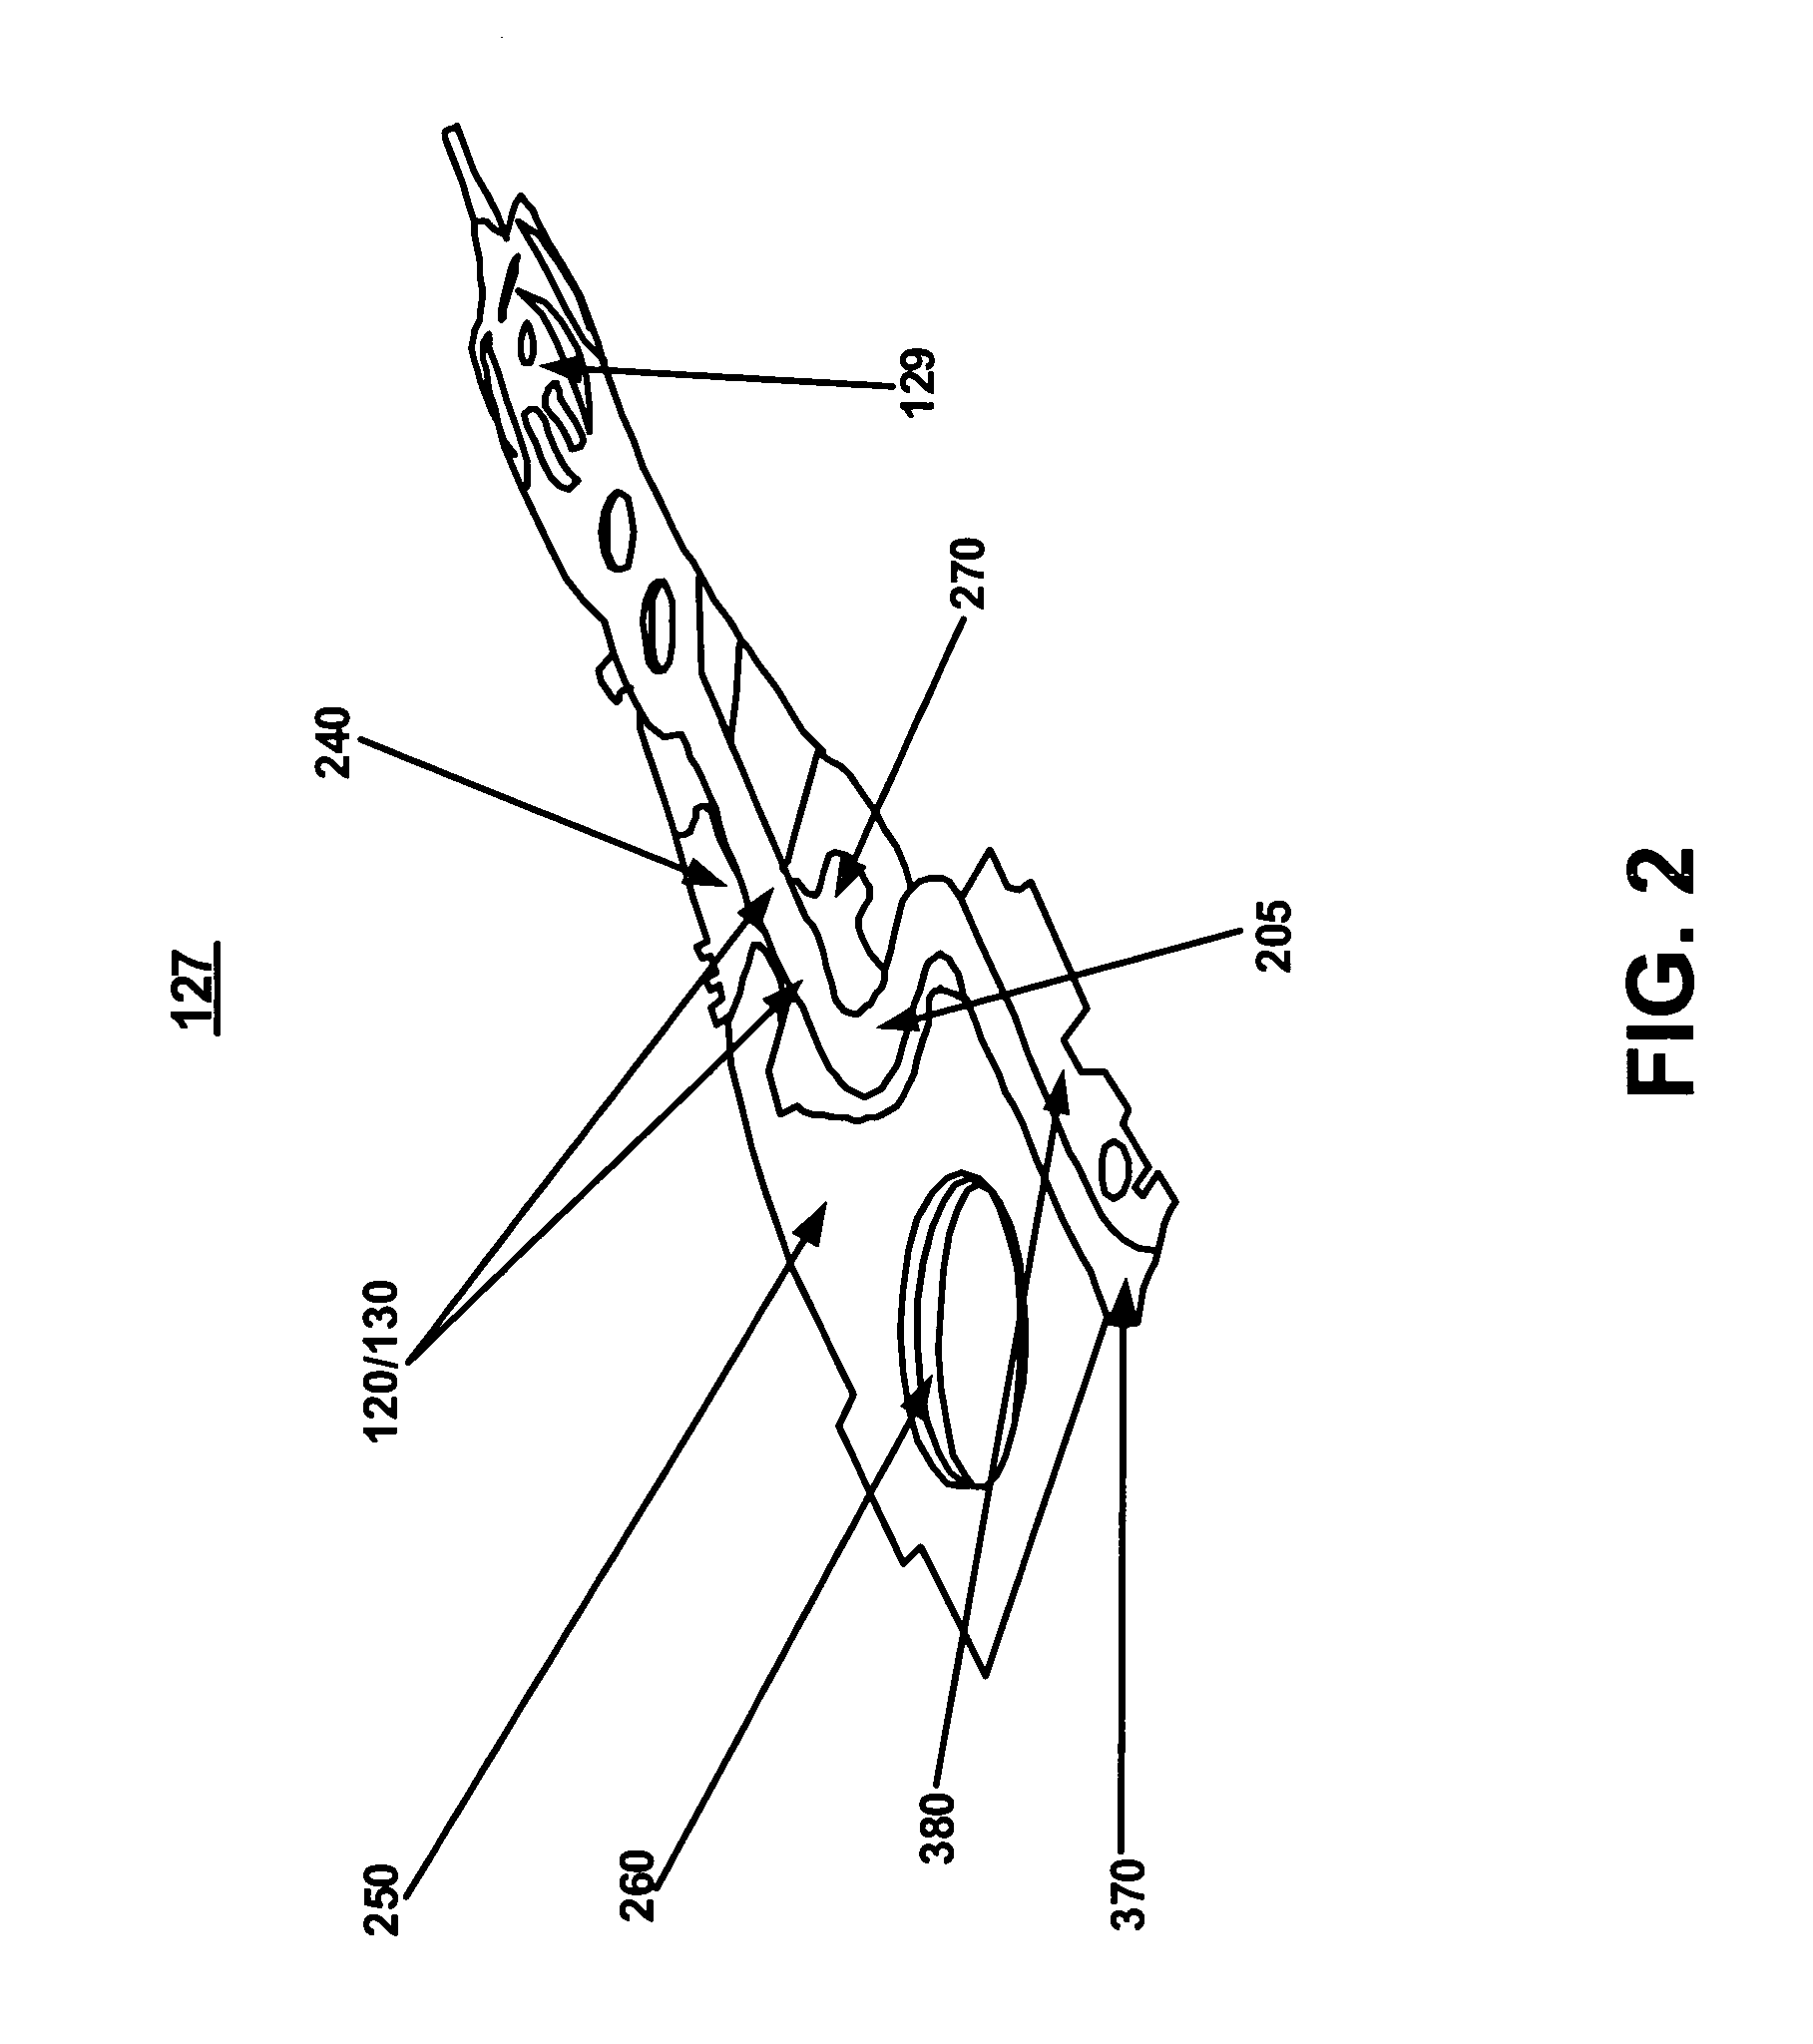 Method and apparatus for reducing solder pad size in an electrical lead suspension (ELS) to decrease signal path capacitive discontinuities